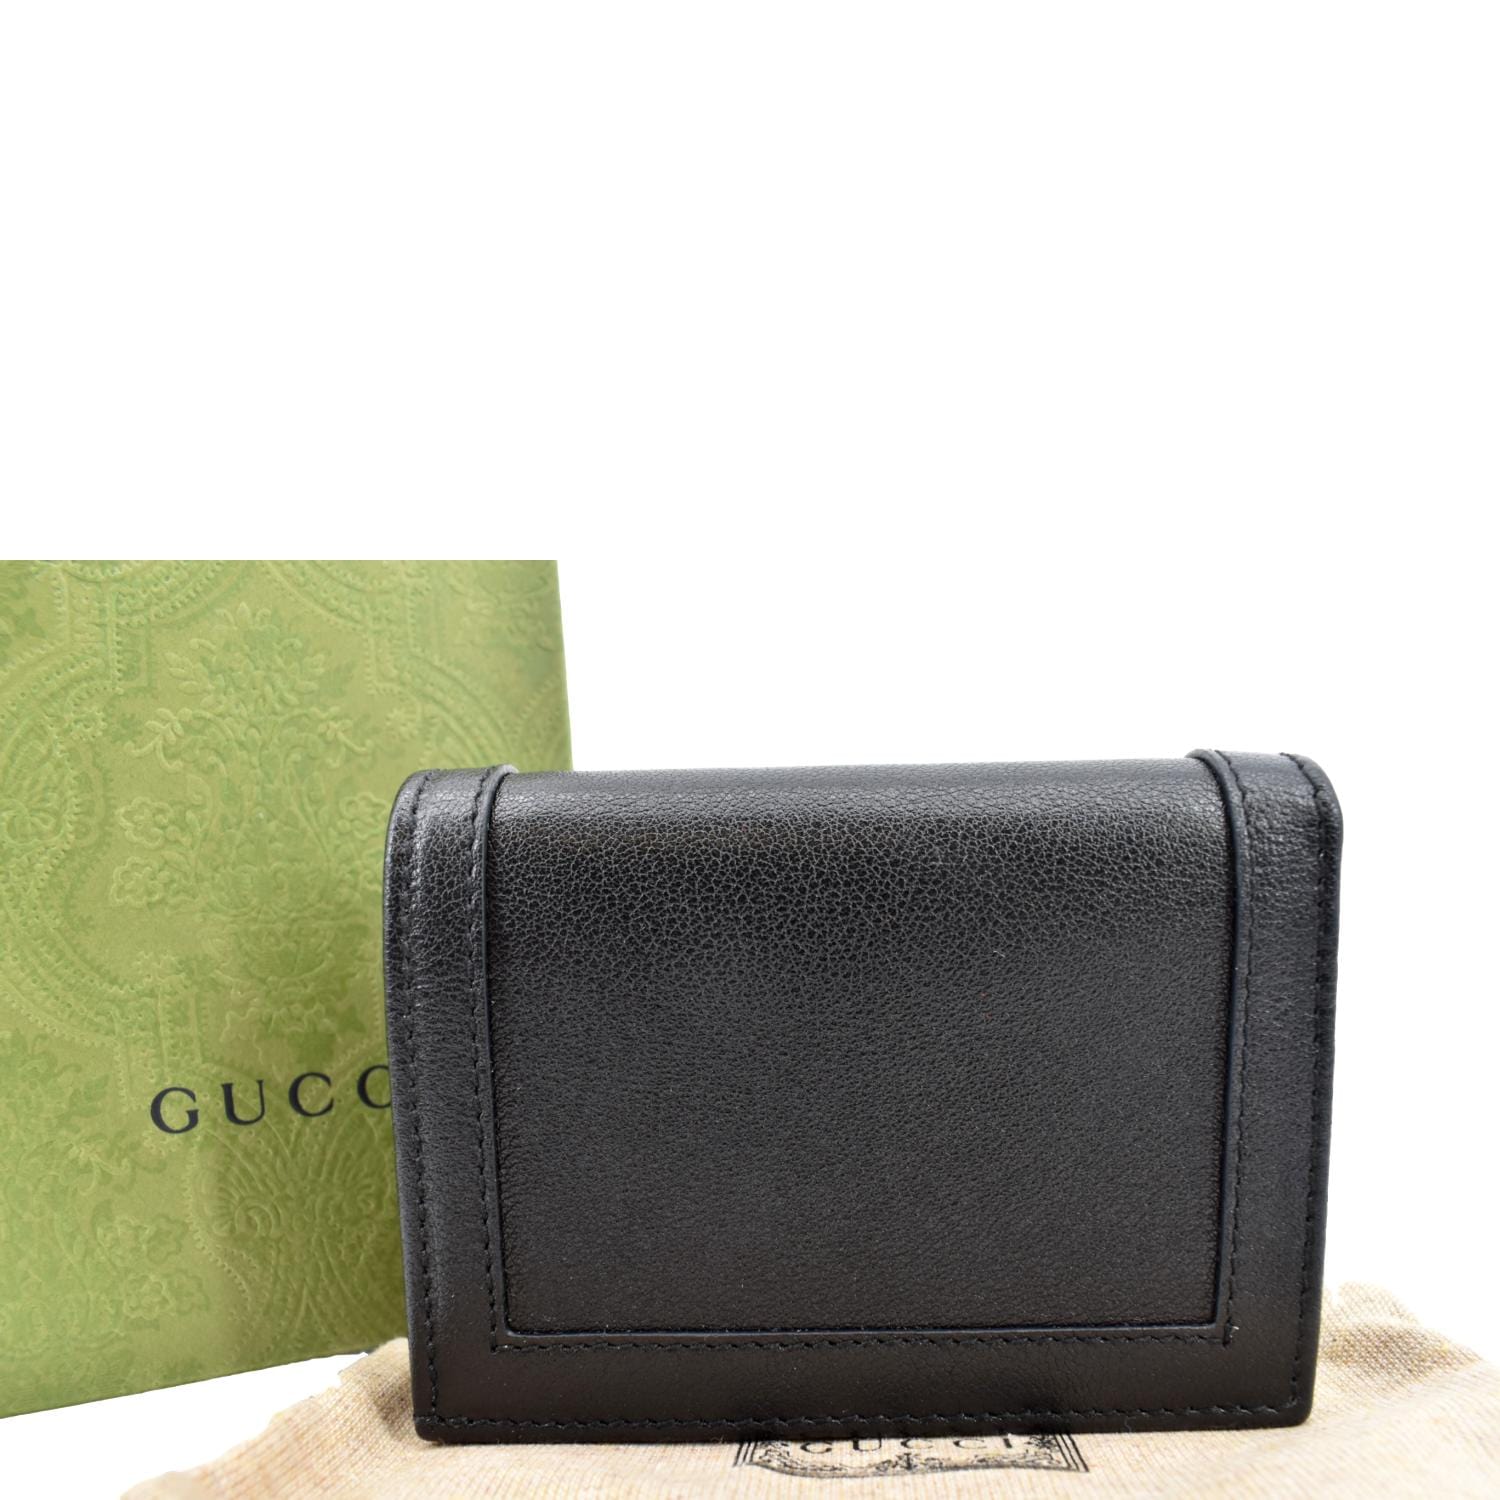 GUCCI Diana Small Bamboo Leather Card Case Wallet Black 658244